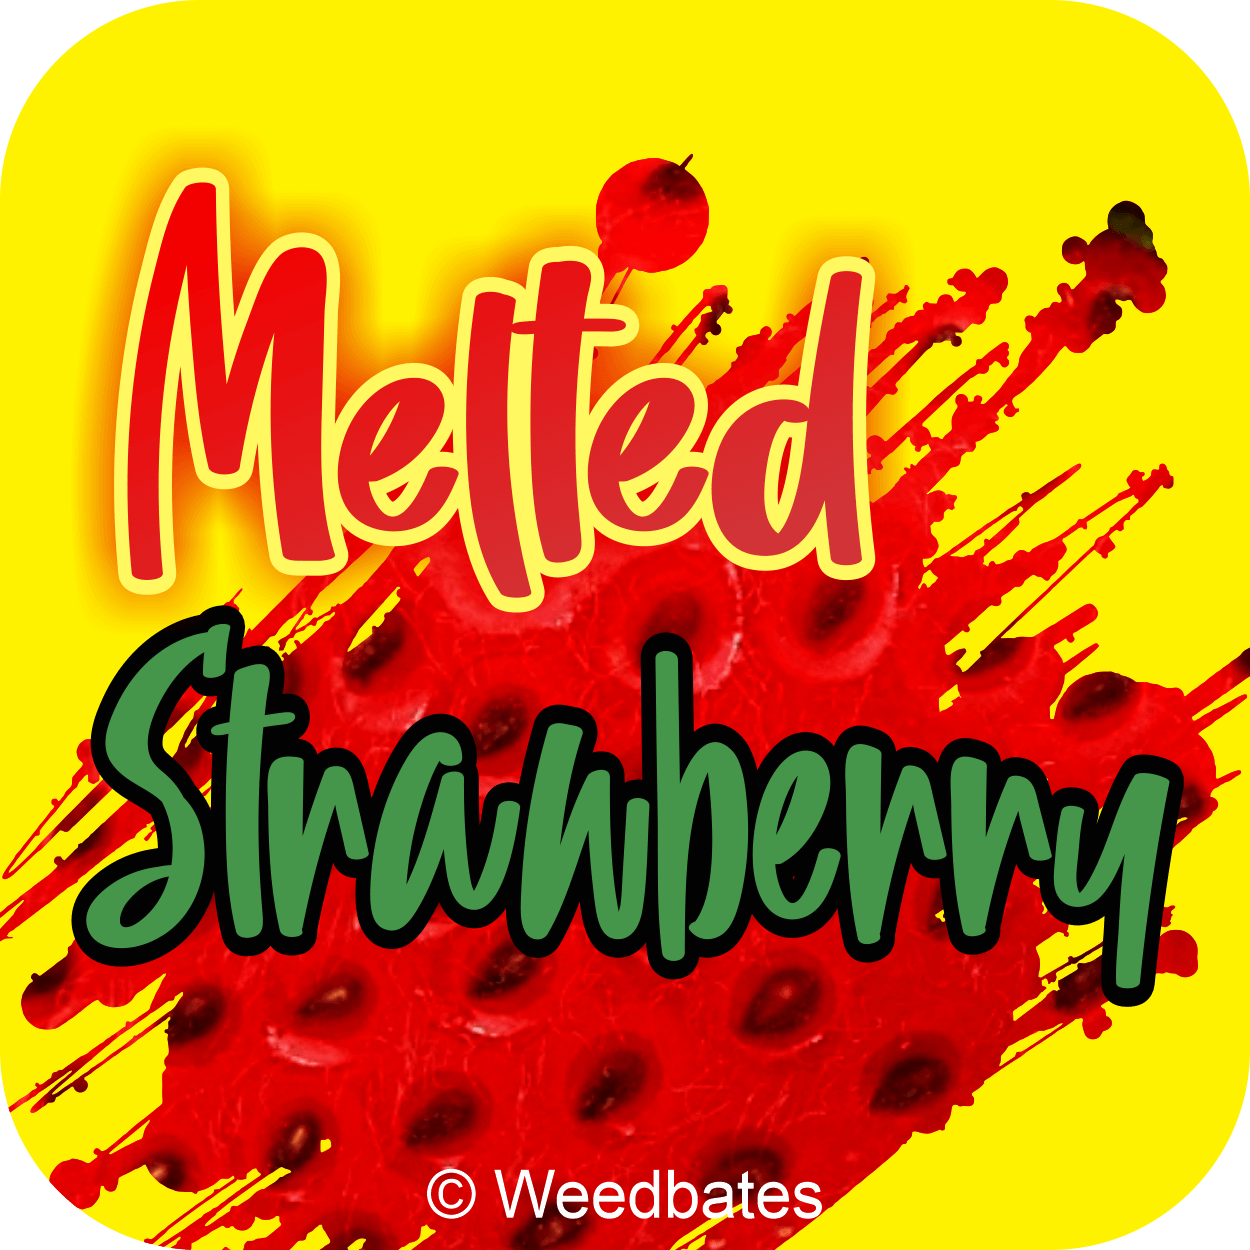 Melted Strawberry